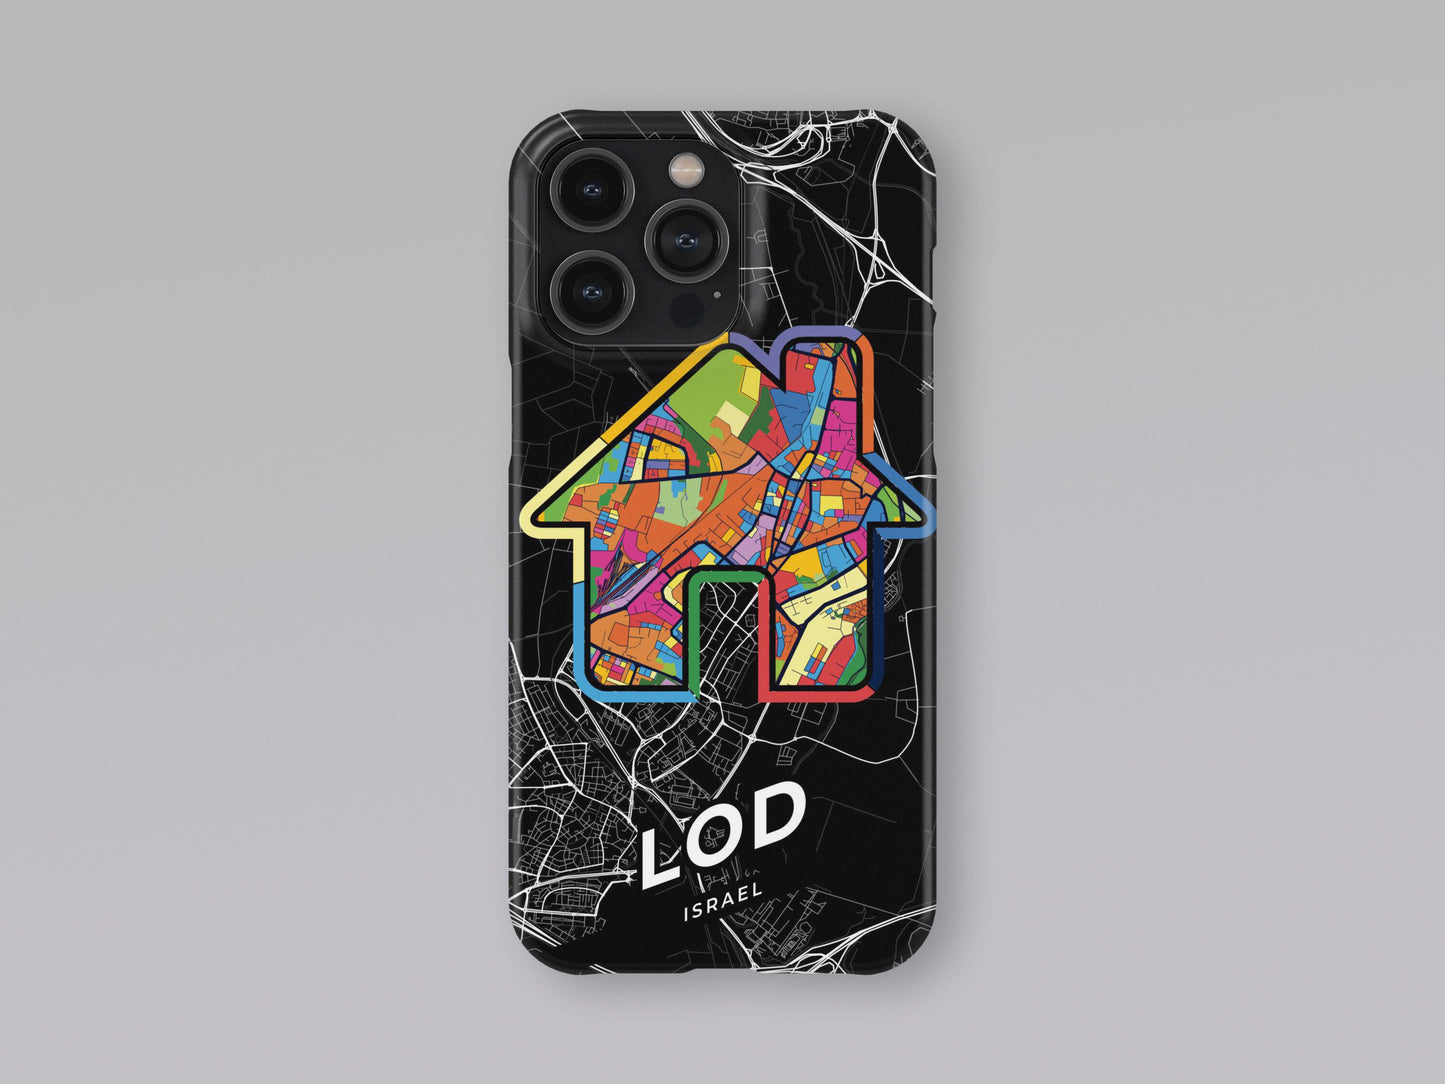 Lod Israel slim phone case with colorful icon. Birthday, wedding or housewarming gift. Couple match cases. 3